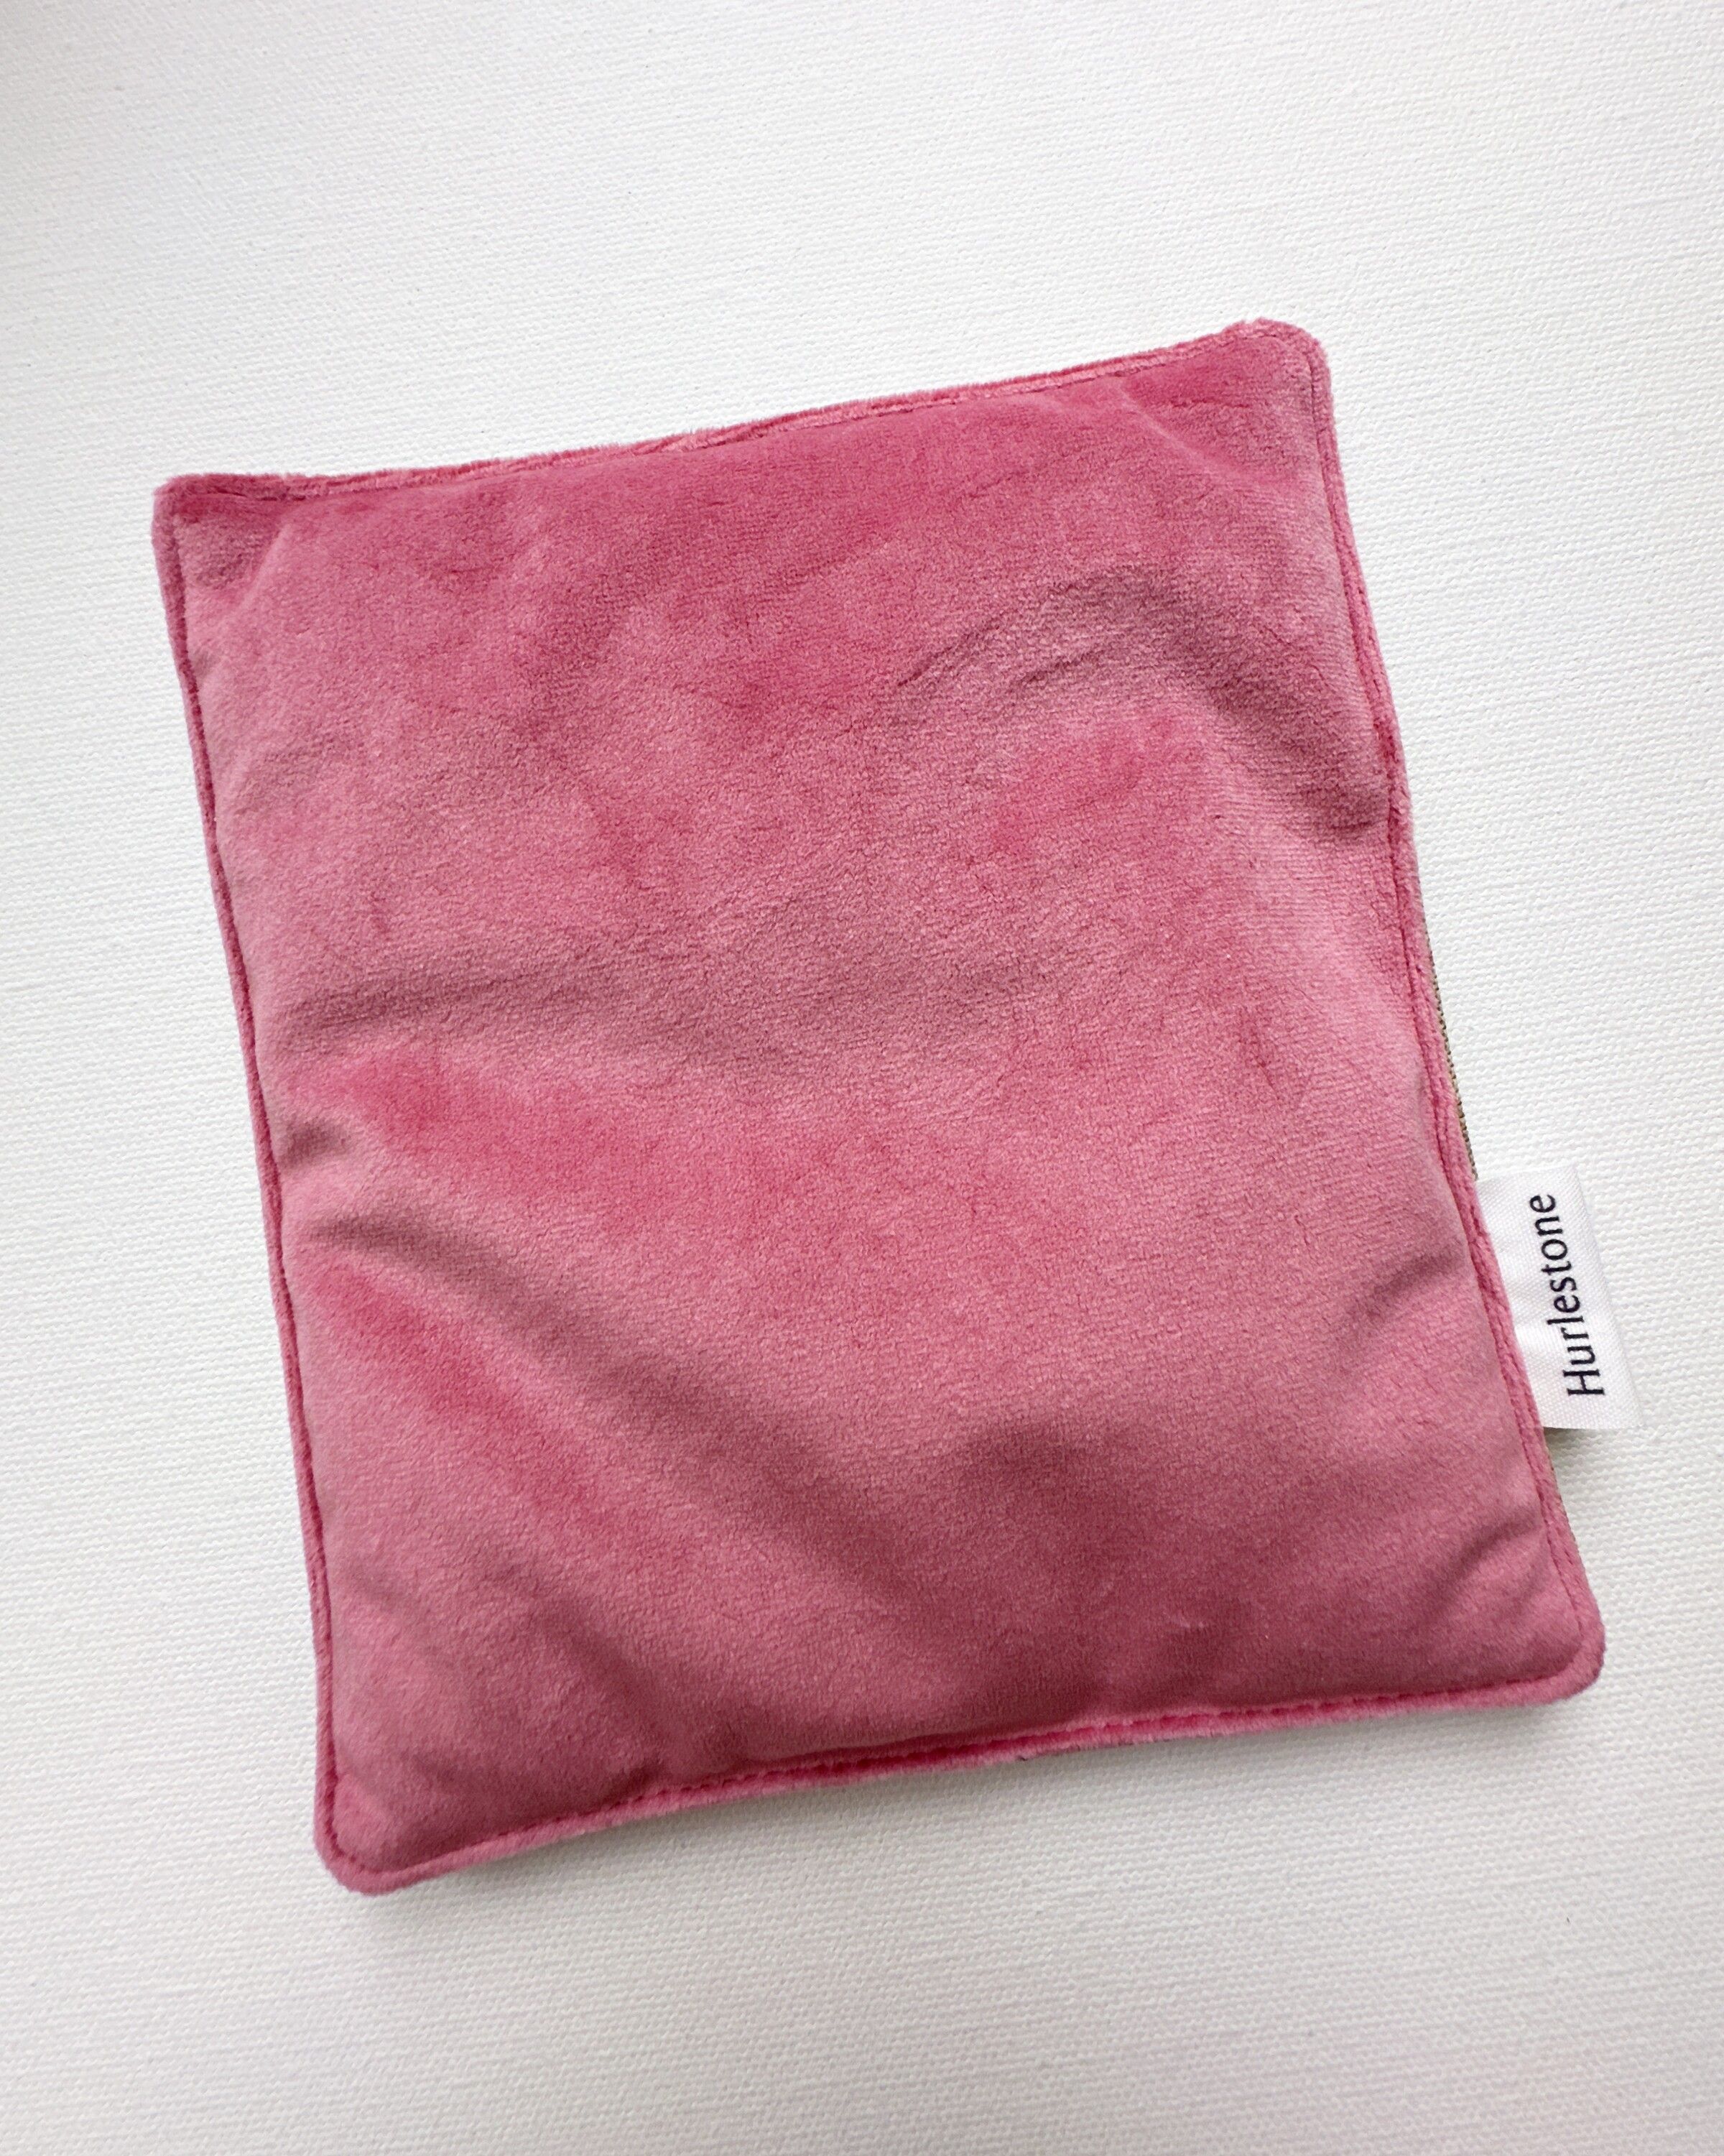 Rose Pen Pillow - Small/Large from NZ$16.00